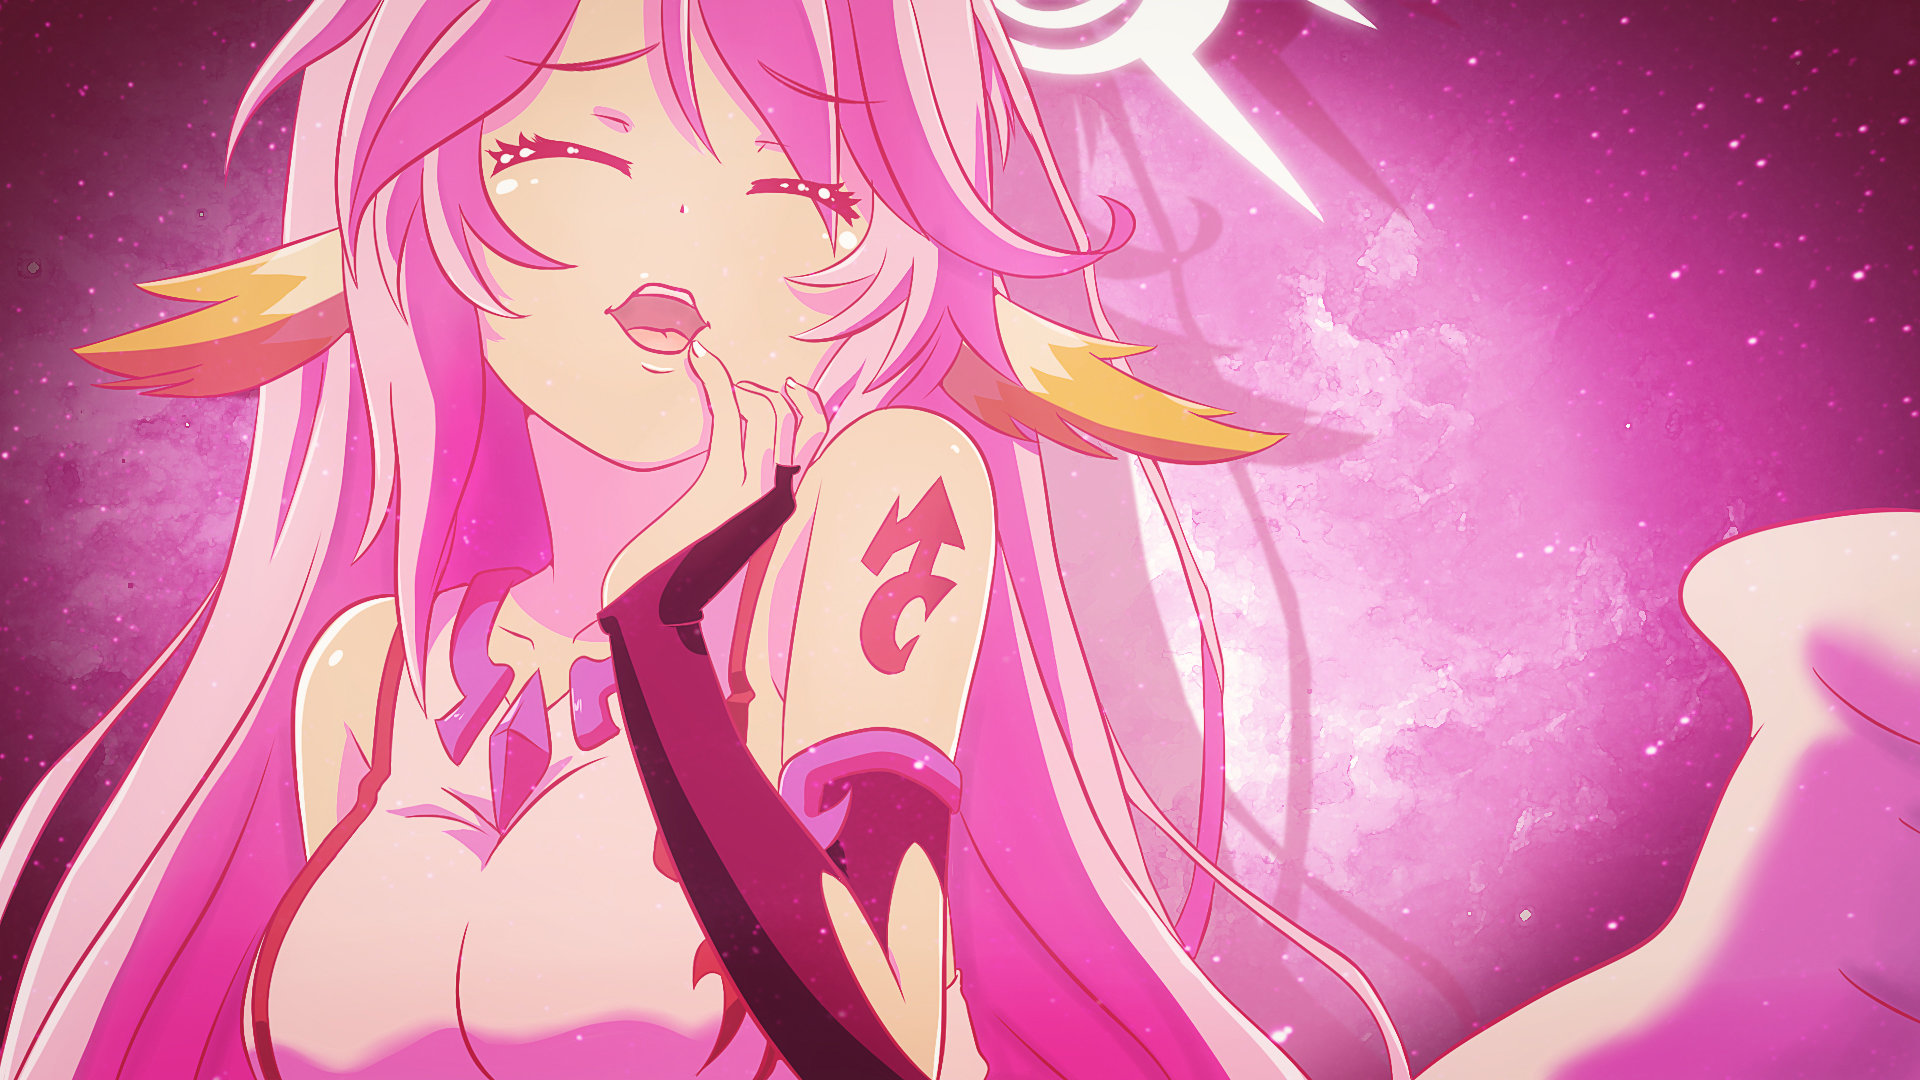 Best Jibril (No Game No Life) wallpaper ID:102457 for High Resolution full hd computer